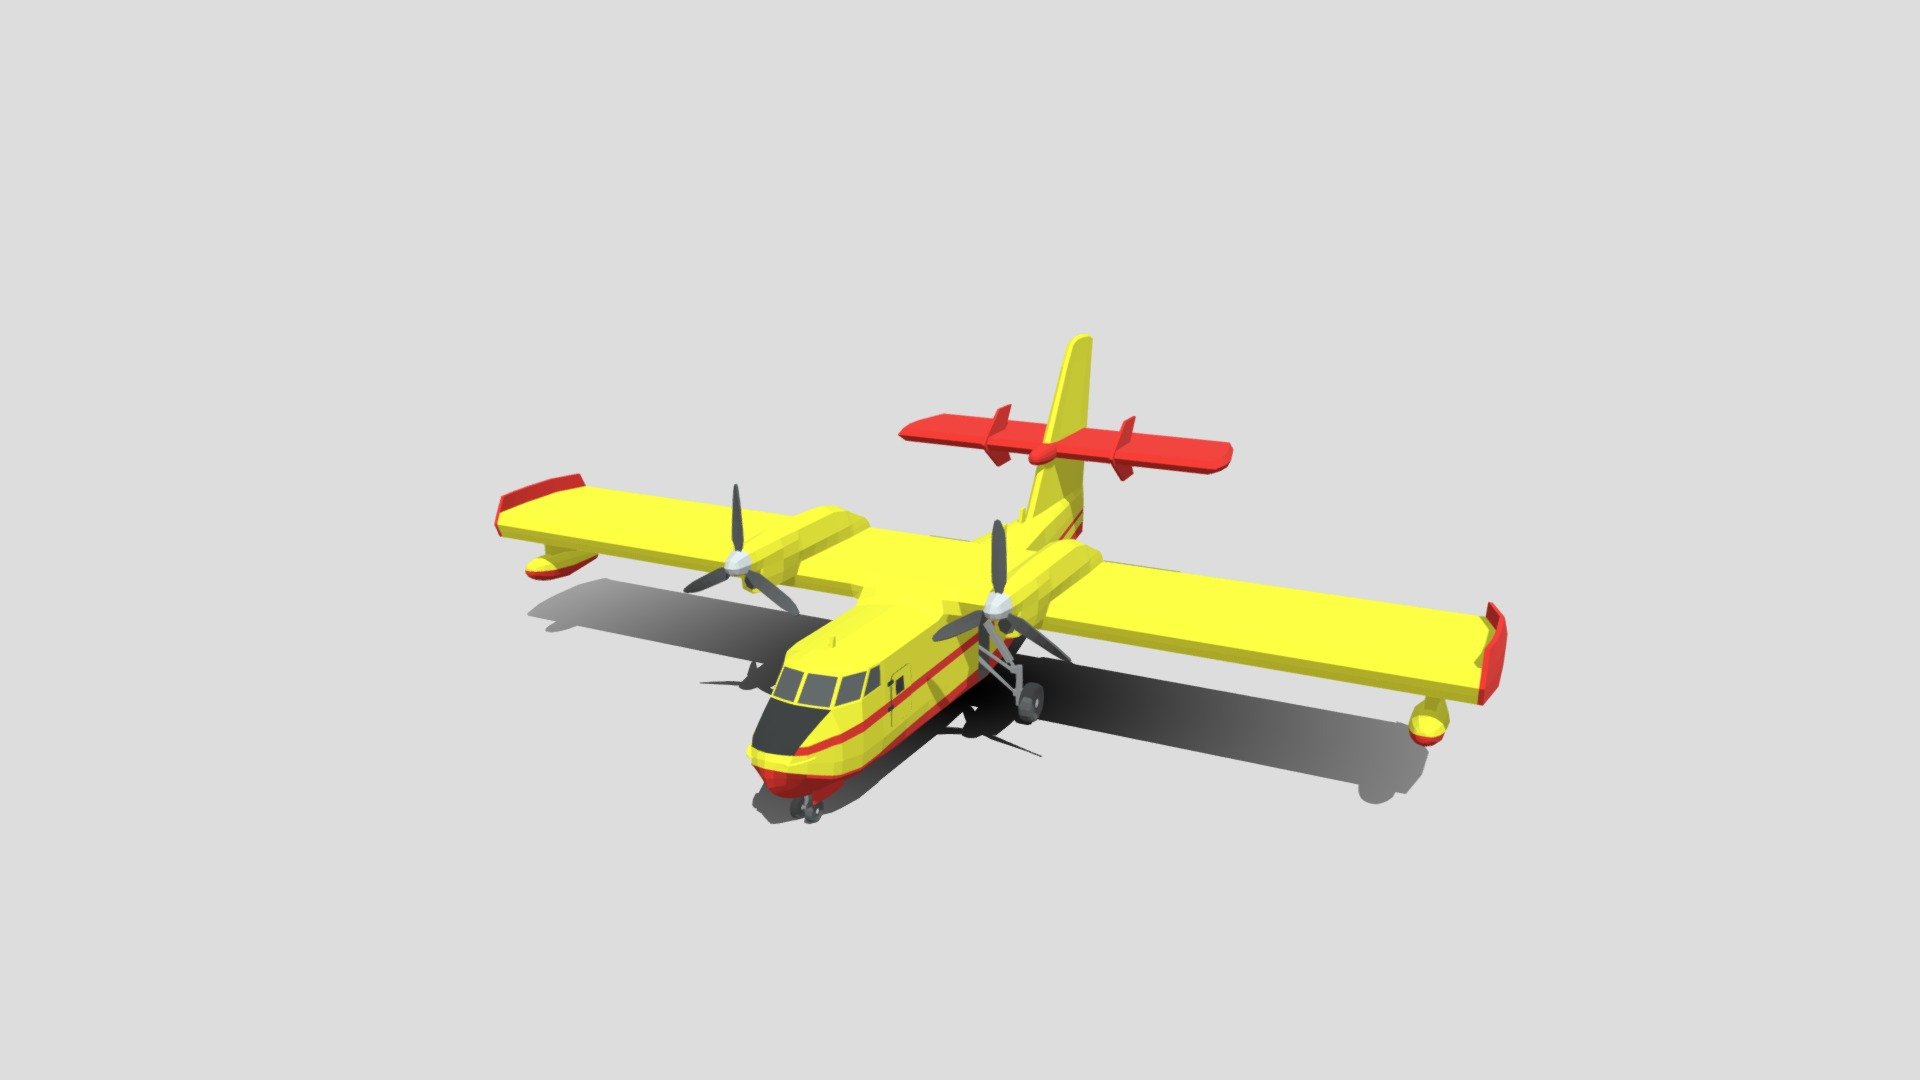 This is a low poly 3d model of a Canadair CL 215 airplane. The low poly airplane was modelled and prepared for low-poly style renderings, background, general CG visualization presented as a mesh with quads and few tris.

Verts : 3.782 Faces: 3.598

The model have simple materials with diffuse colors.

No ring, maps and no UVW mapping is available.

The original file was created in blender. You will receive a 3DS, OBJ, FBX, blend, DAE, Stl, glTF.

All preview images were rendered with Blender Cycles. Product is ready to render out-of-the-box. Please note that the lights, cameras, and background is only included in the .blend file. The model is clean and alone in the other provided files, centred at origin and has real-world scale 3d model